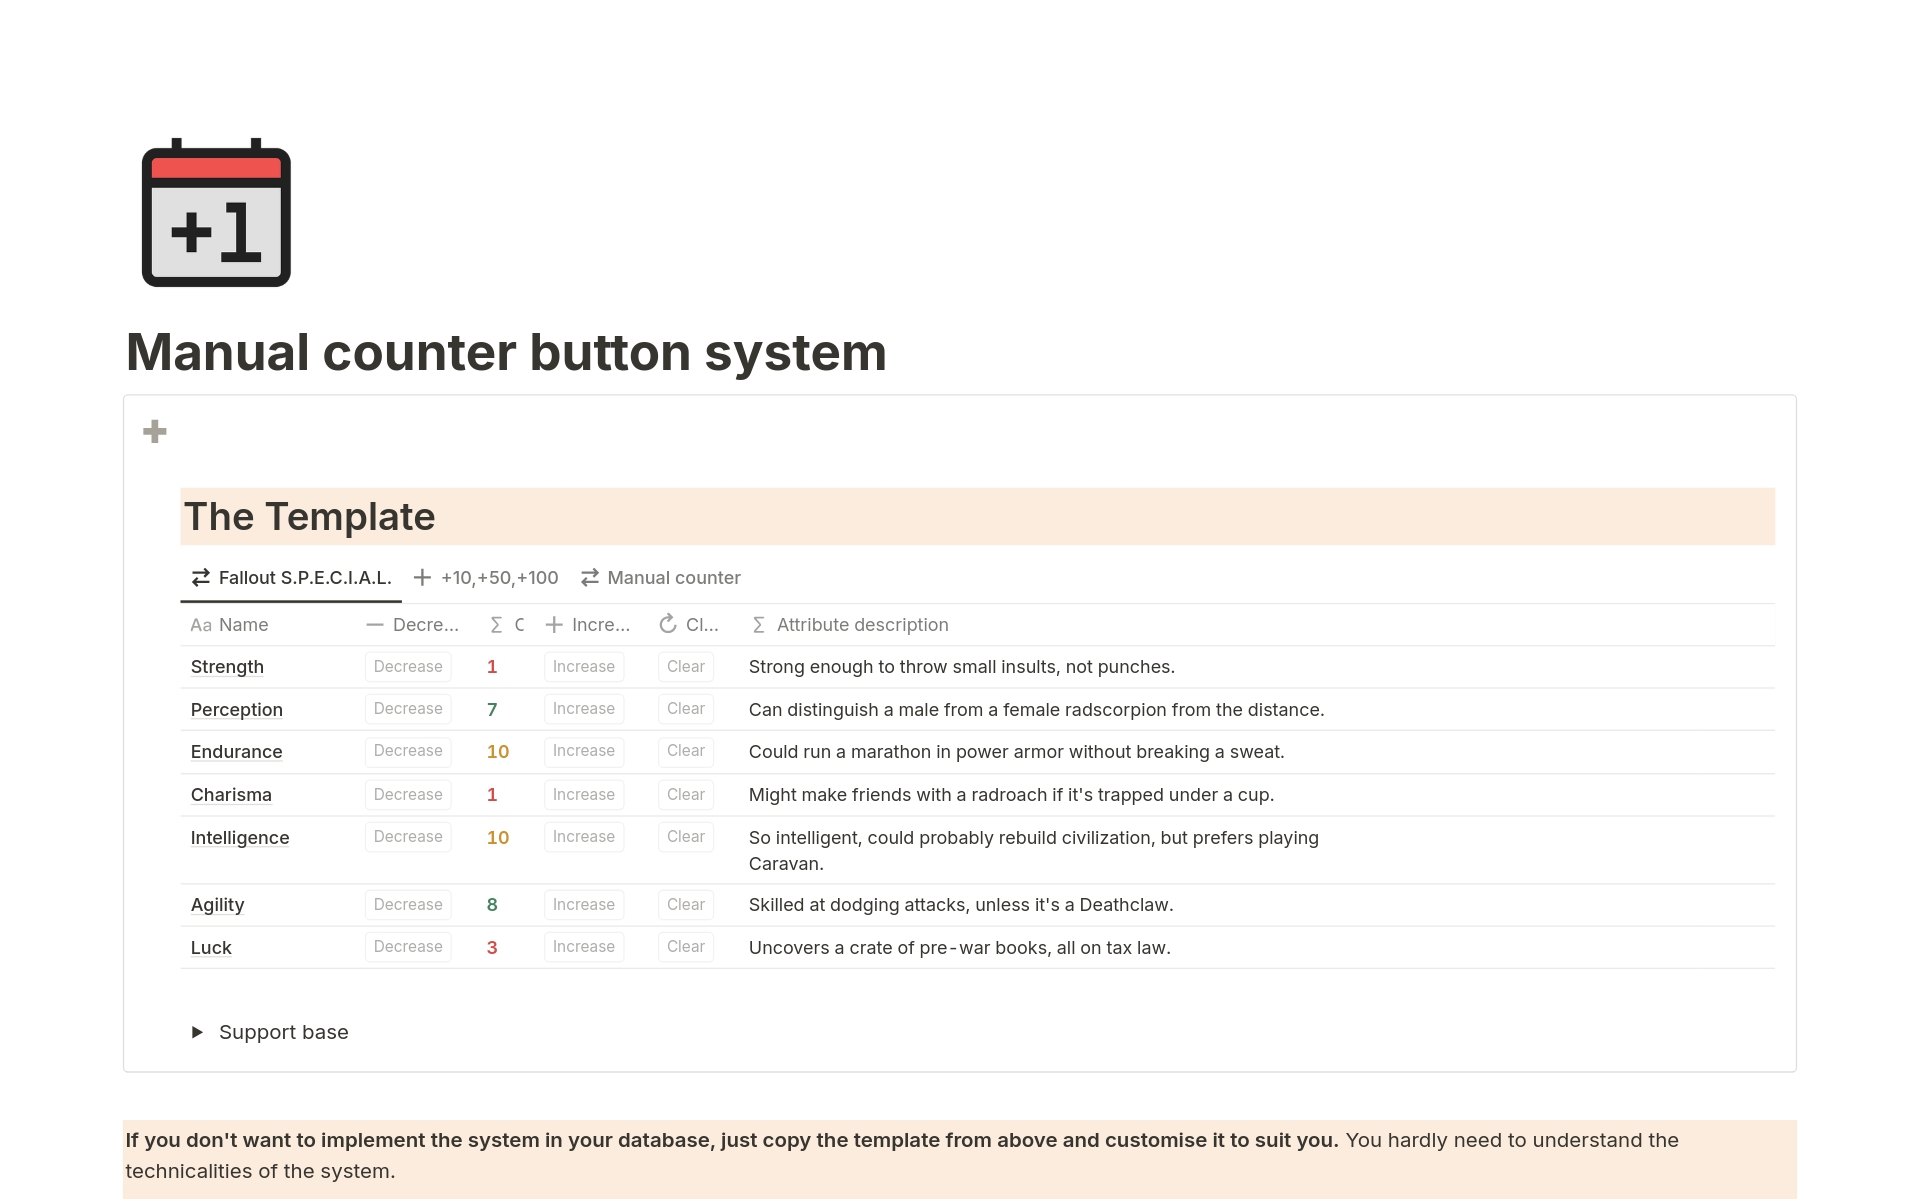 Manual Counter Button System is a template that includes a pre-configured manual counter and guides on how to modify and adapt it. It's useful for those who prefer manually adding values using buttons.